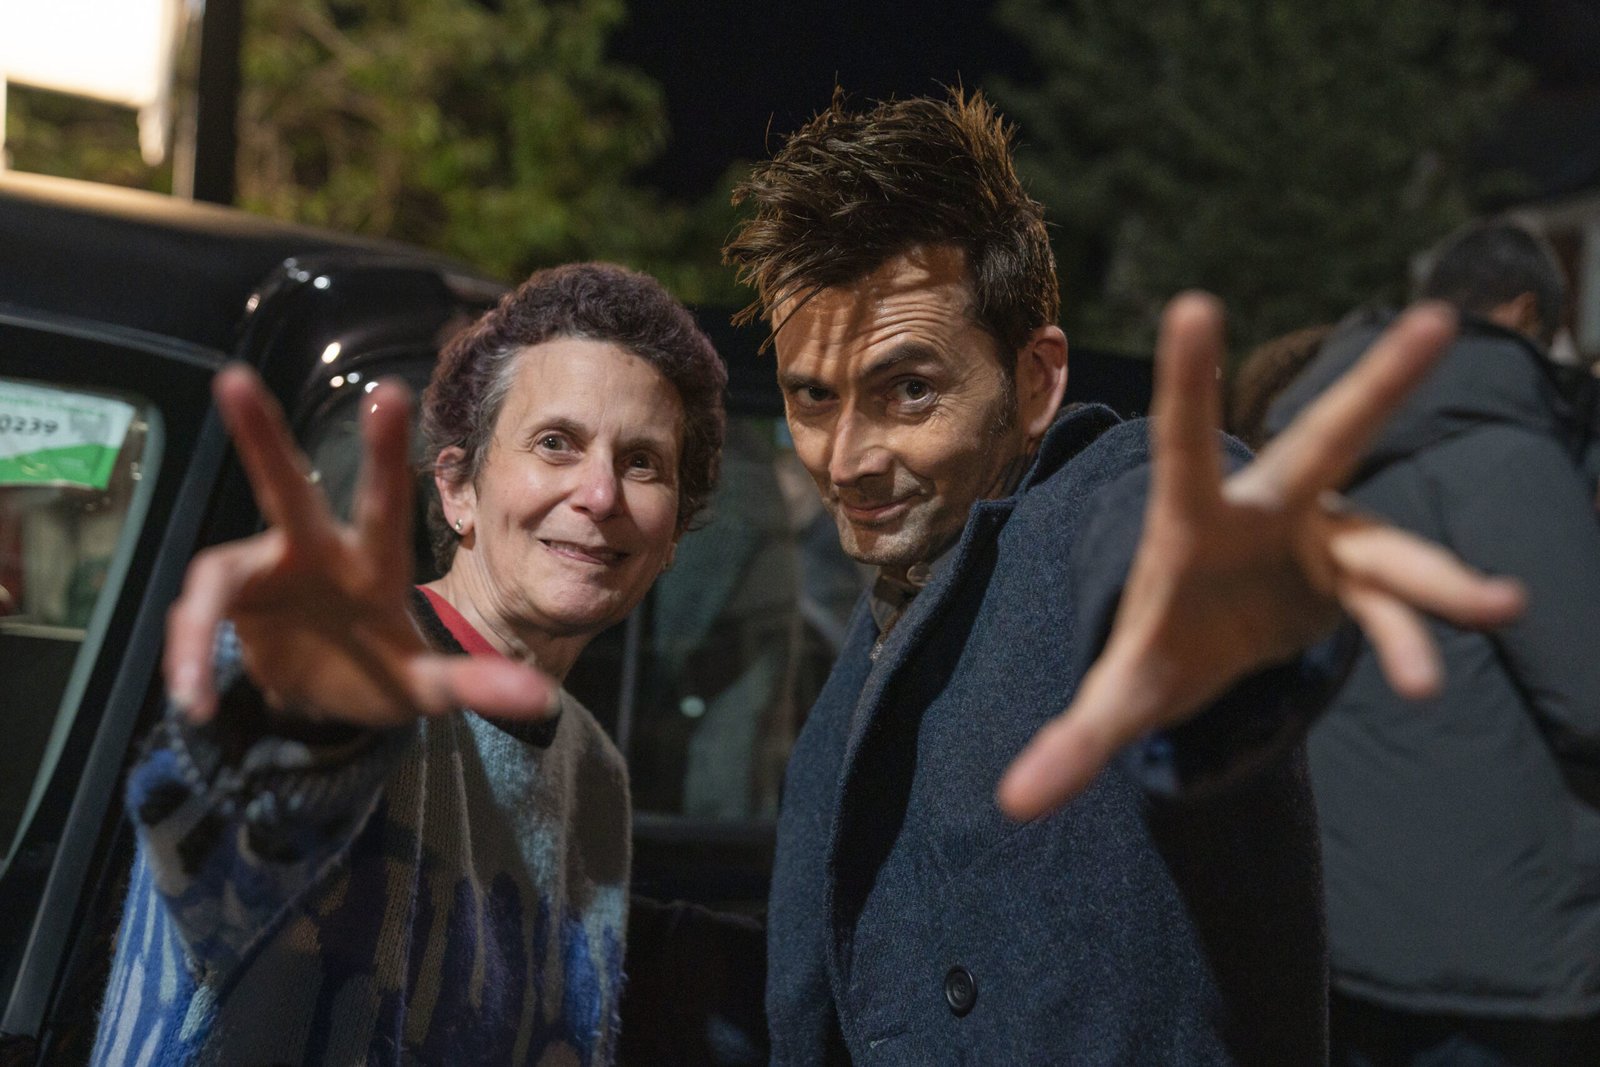 The Star Beast Director Rachel Talalay Had No Involvement with the Doctor Who Pre-Titles